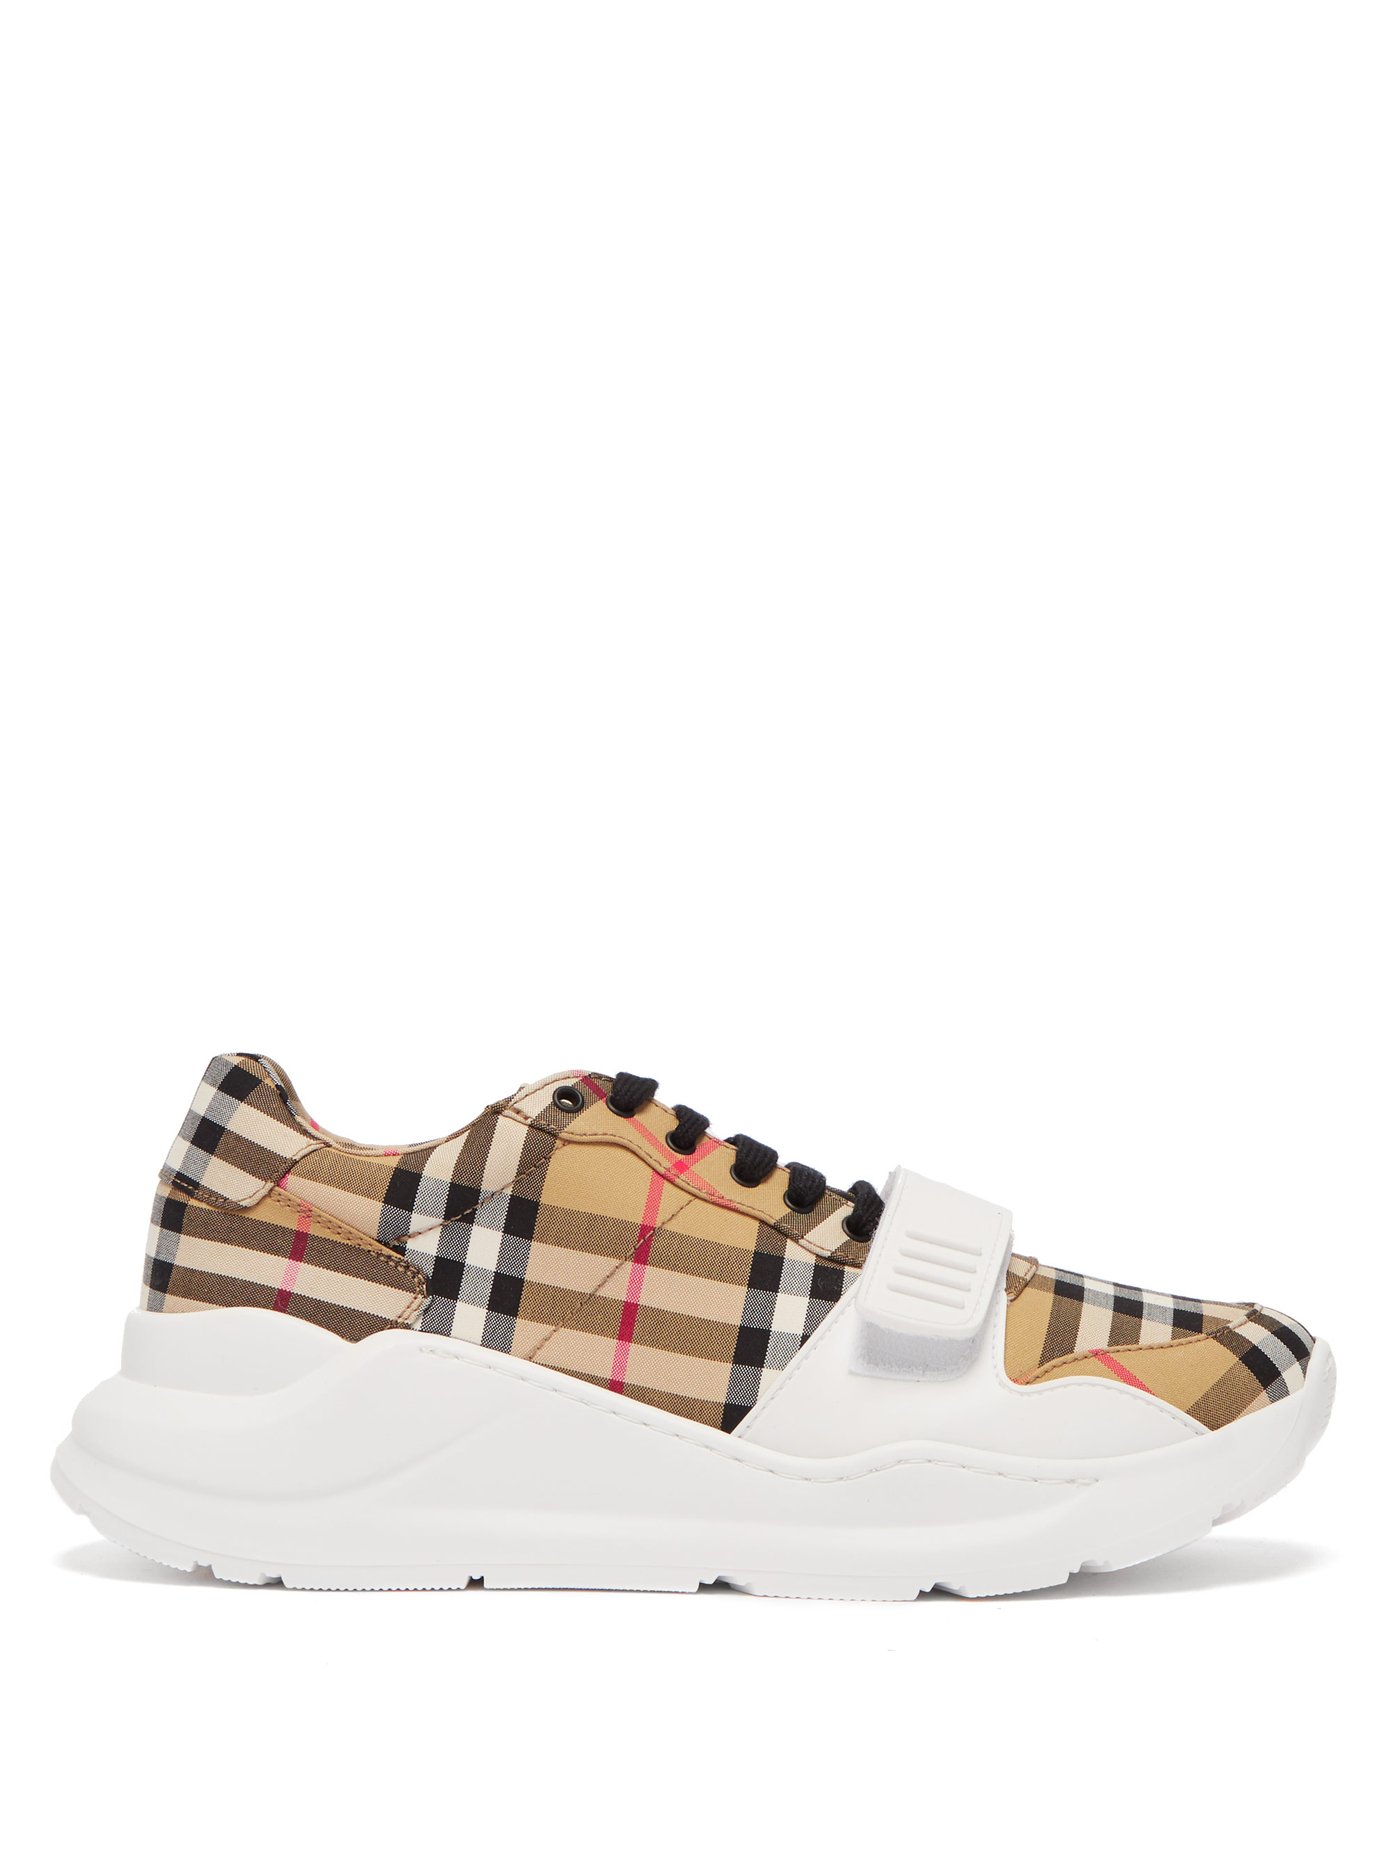 burberry baby trainers